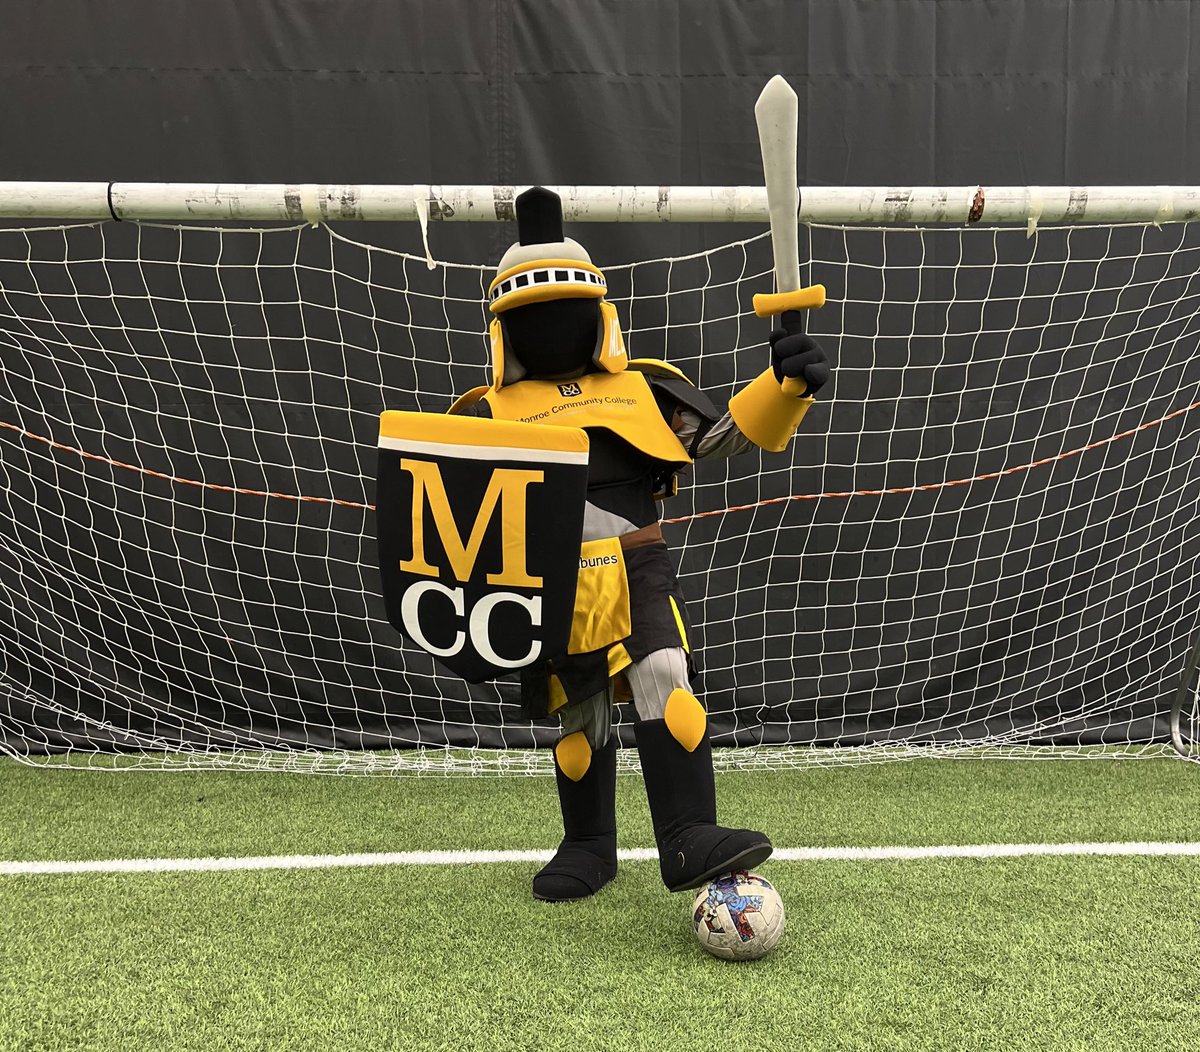 🎉 MCC's own Tiberius the Tribune is in the running for Mascot Madness 2024! 🏆 Show your support by casting your vote and help us bring home the championship! Let's rally together and make Tiberius proud! 📣💪 Vote now: suny.edu/mascotmadness/… #MascotMadness2024 #TiberiusFTW